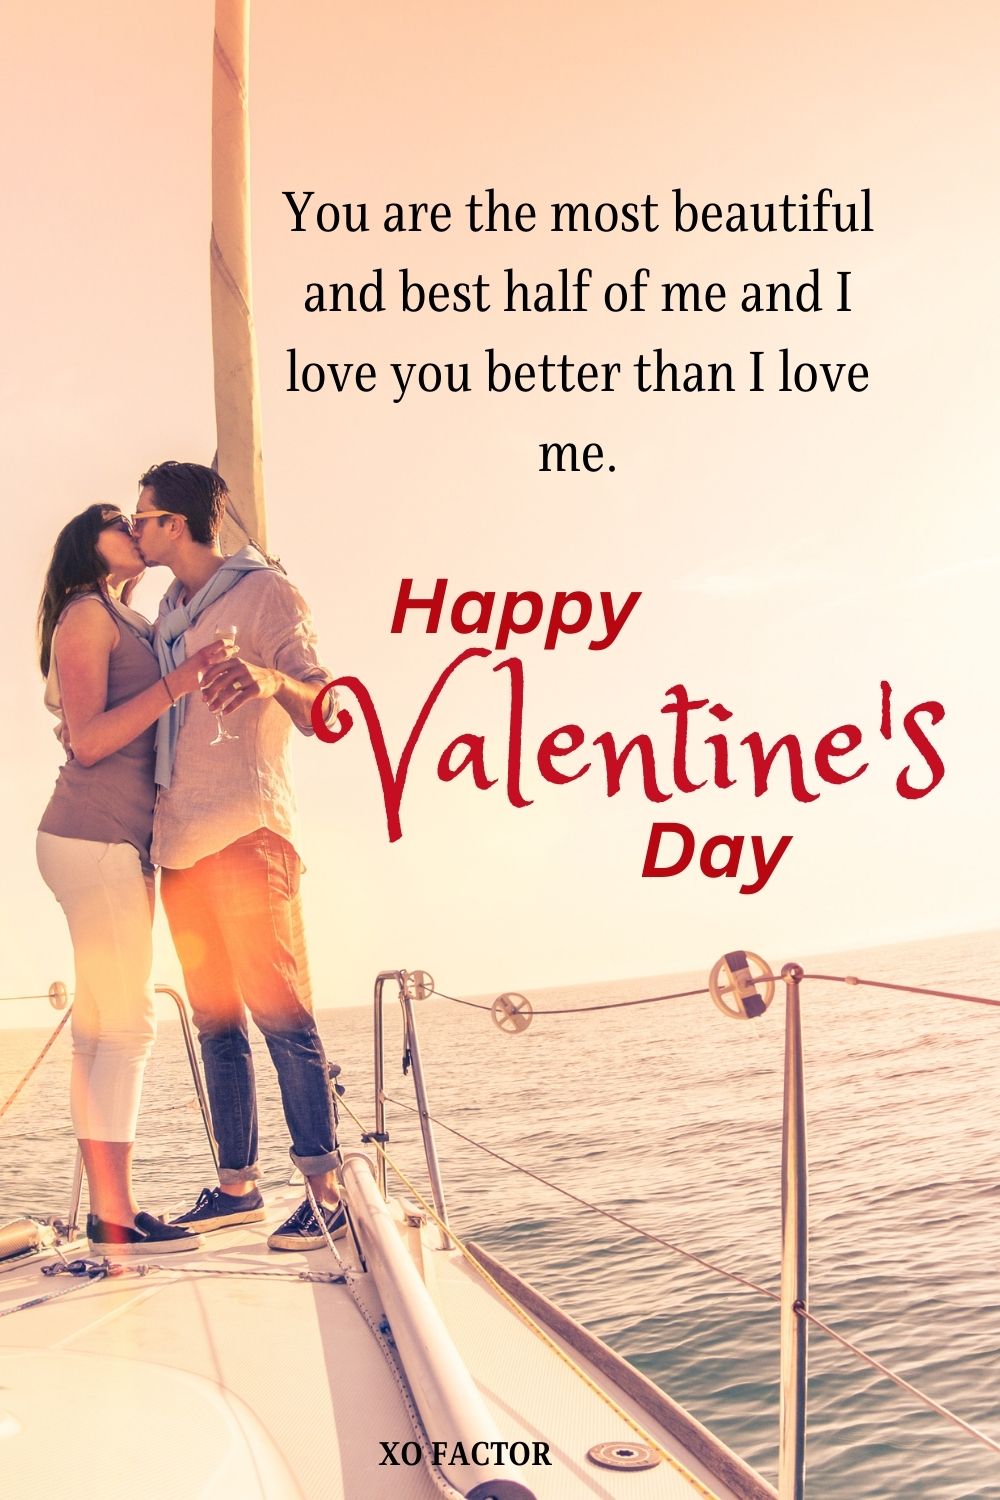 You are the most beautiful and best half of me and I love you better than I love me. Happy valentine’s Day.